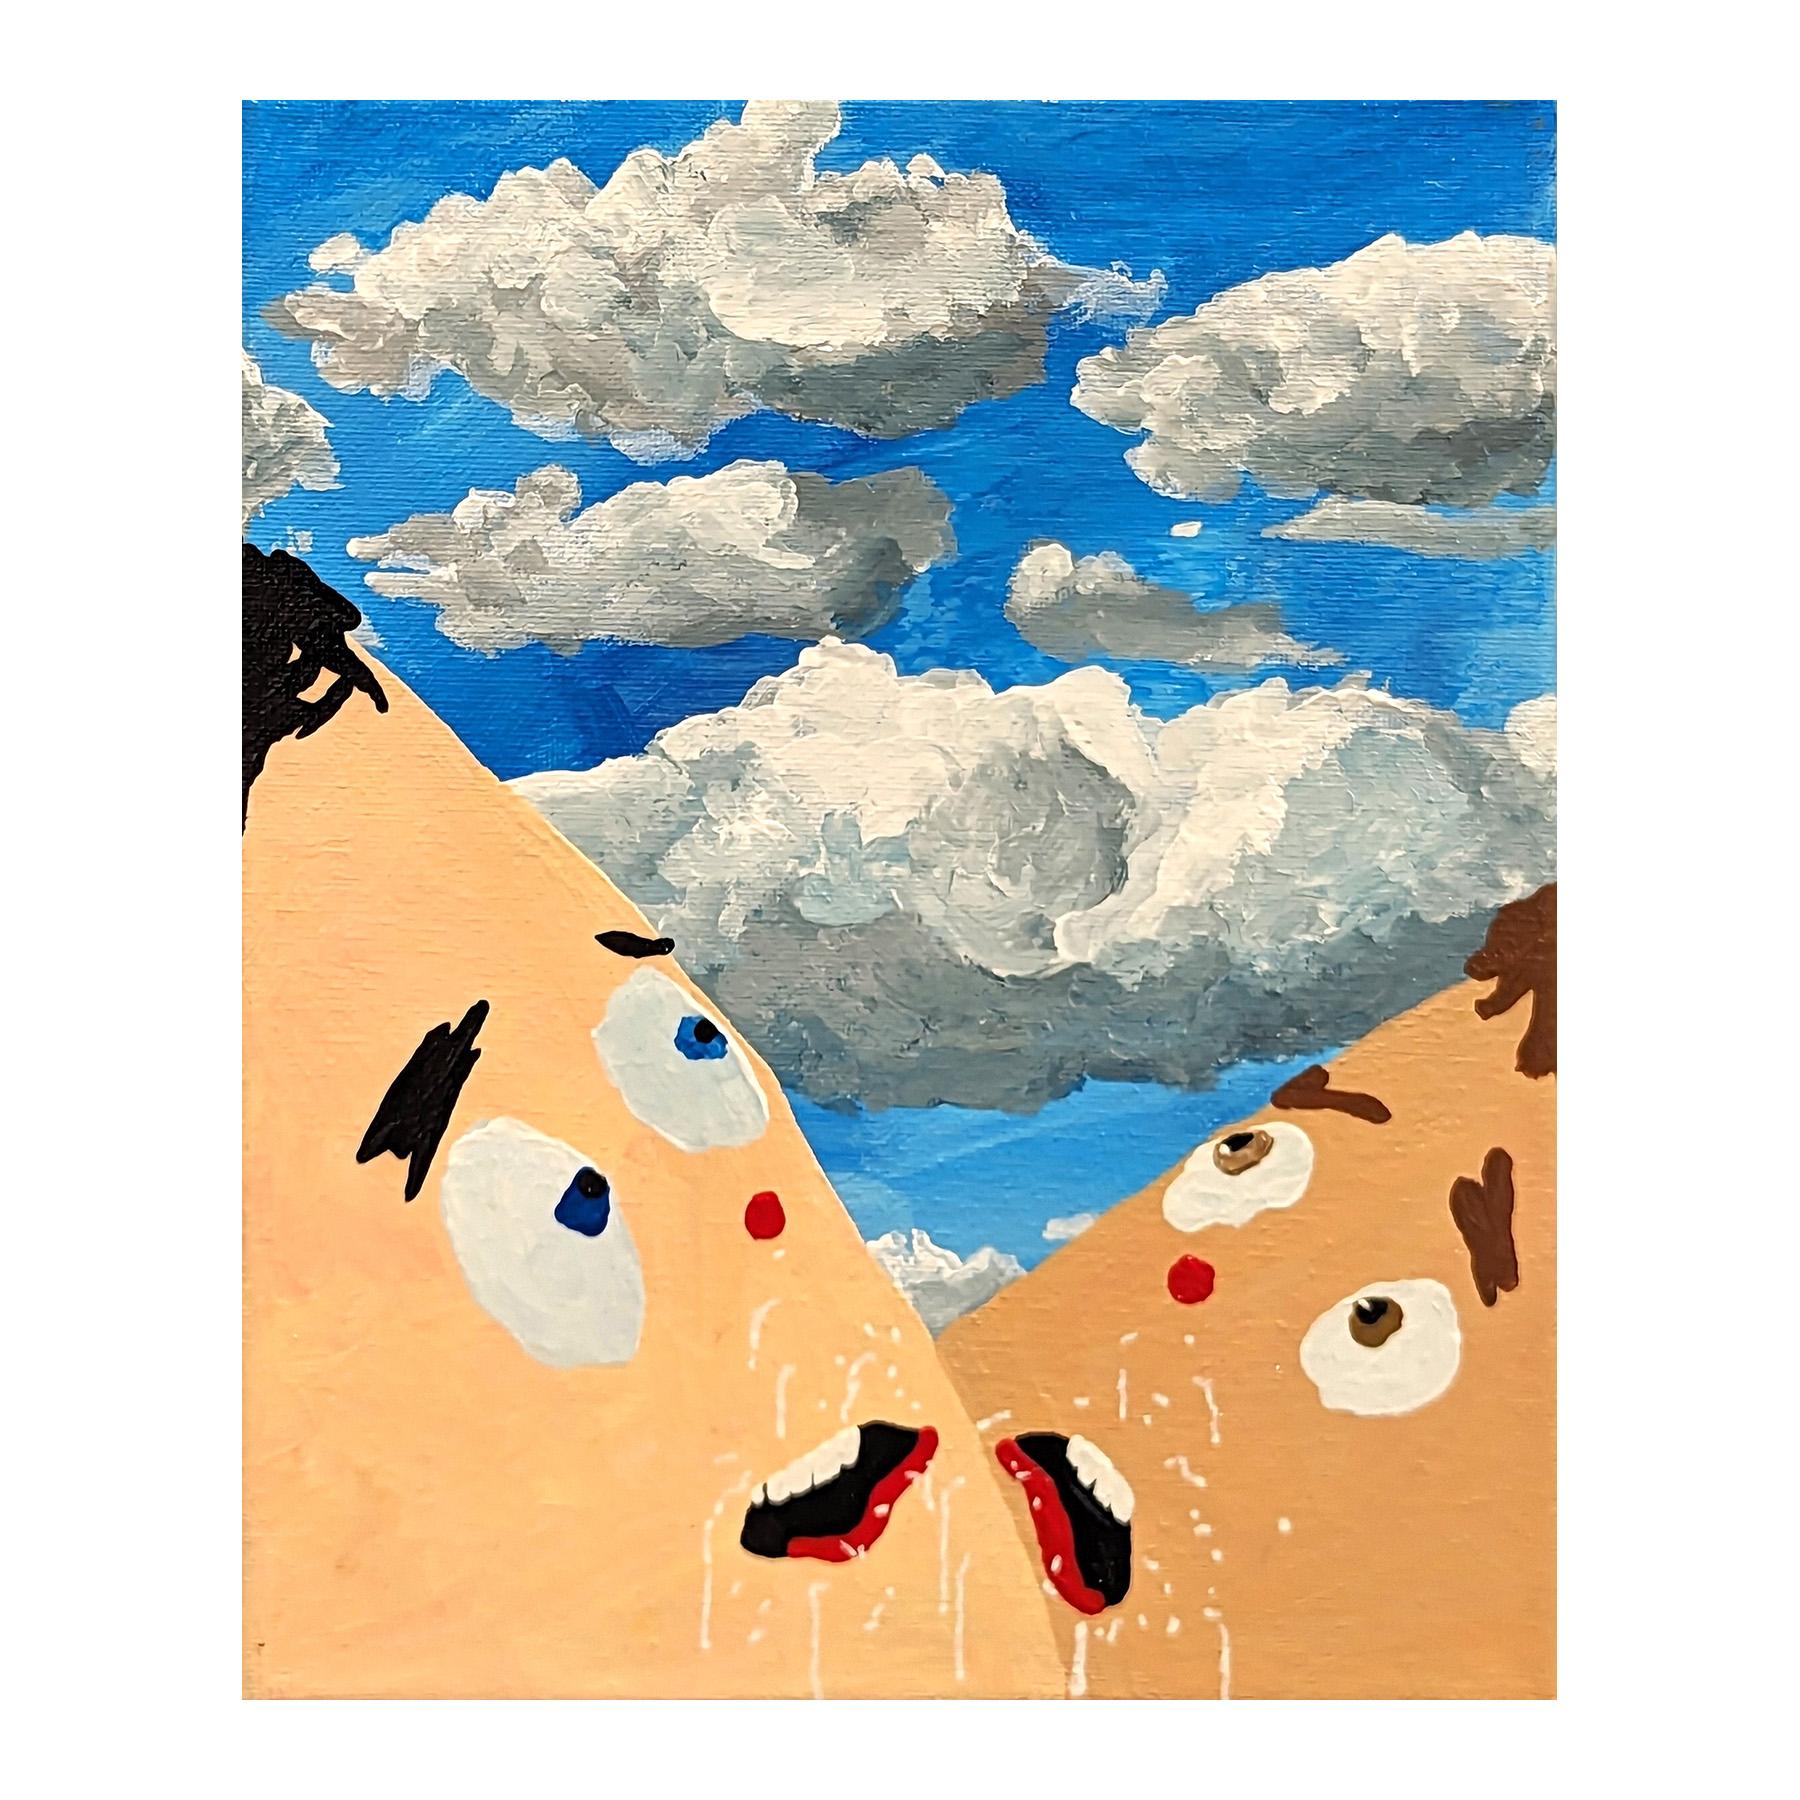 Colorful dark humor painting by Memphis-based contemporary artist Alex Paulus. The work features two cartoonish figures looking up at the bright blue sky with their eyes wide and mouths covered in white drips. Currently unframed, but options are